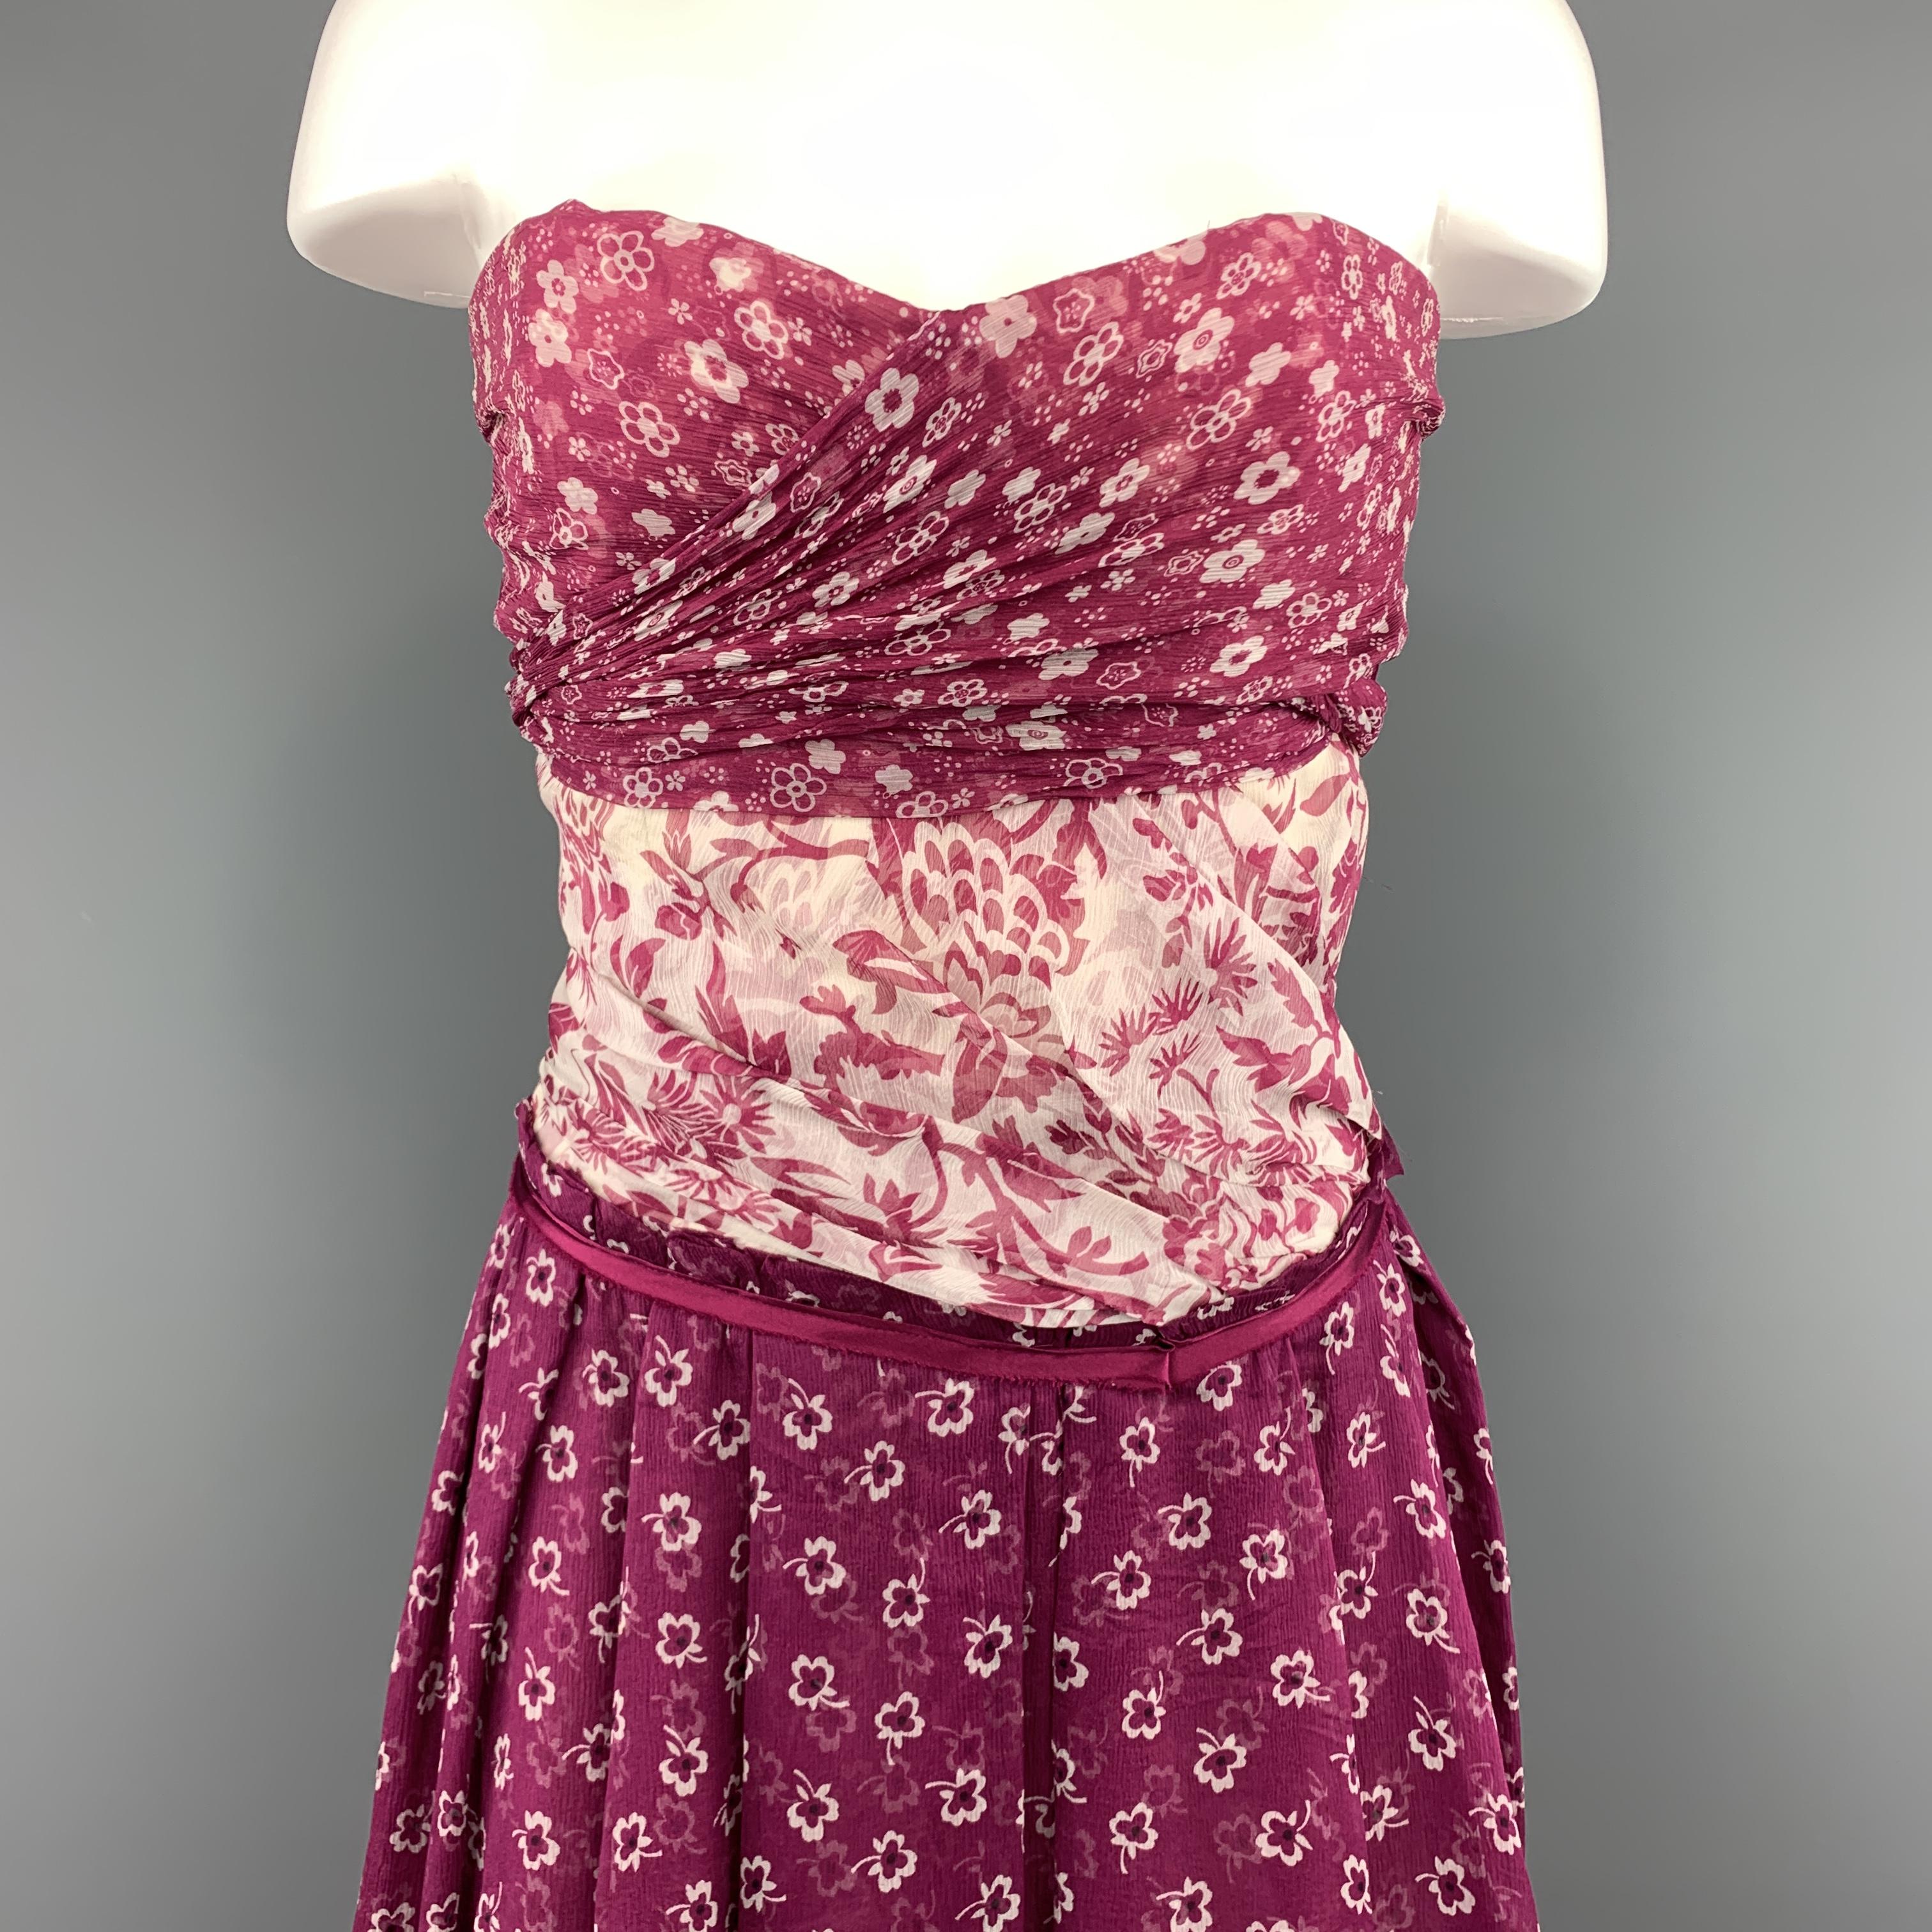 D&G by DOLCE & GABBANA strapless bustier cocktail dress comes in textured silk chiffon and features a purple draped overlay bust that ties in back, cream floral draped mid section, and ruffled pleat skirt. Made in Italy.
 
Very Good Pre-Owned